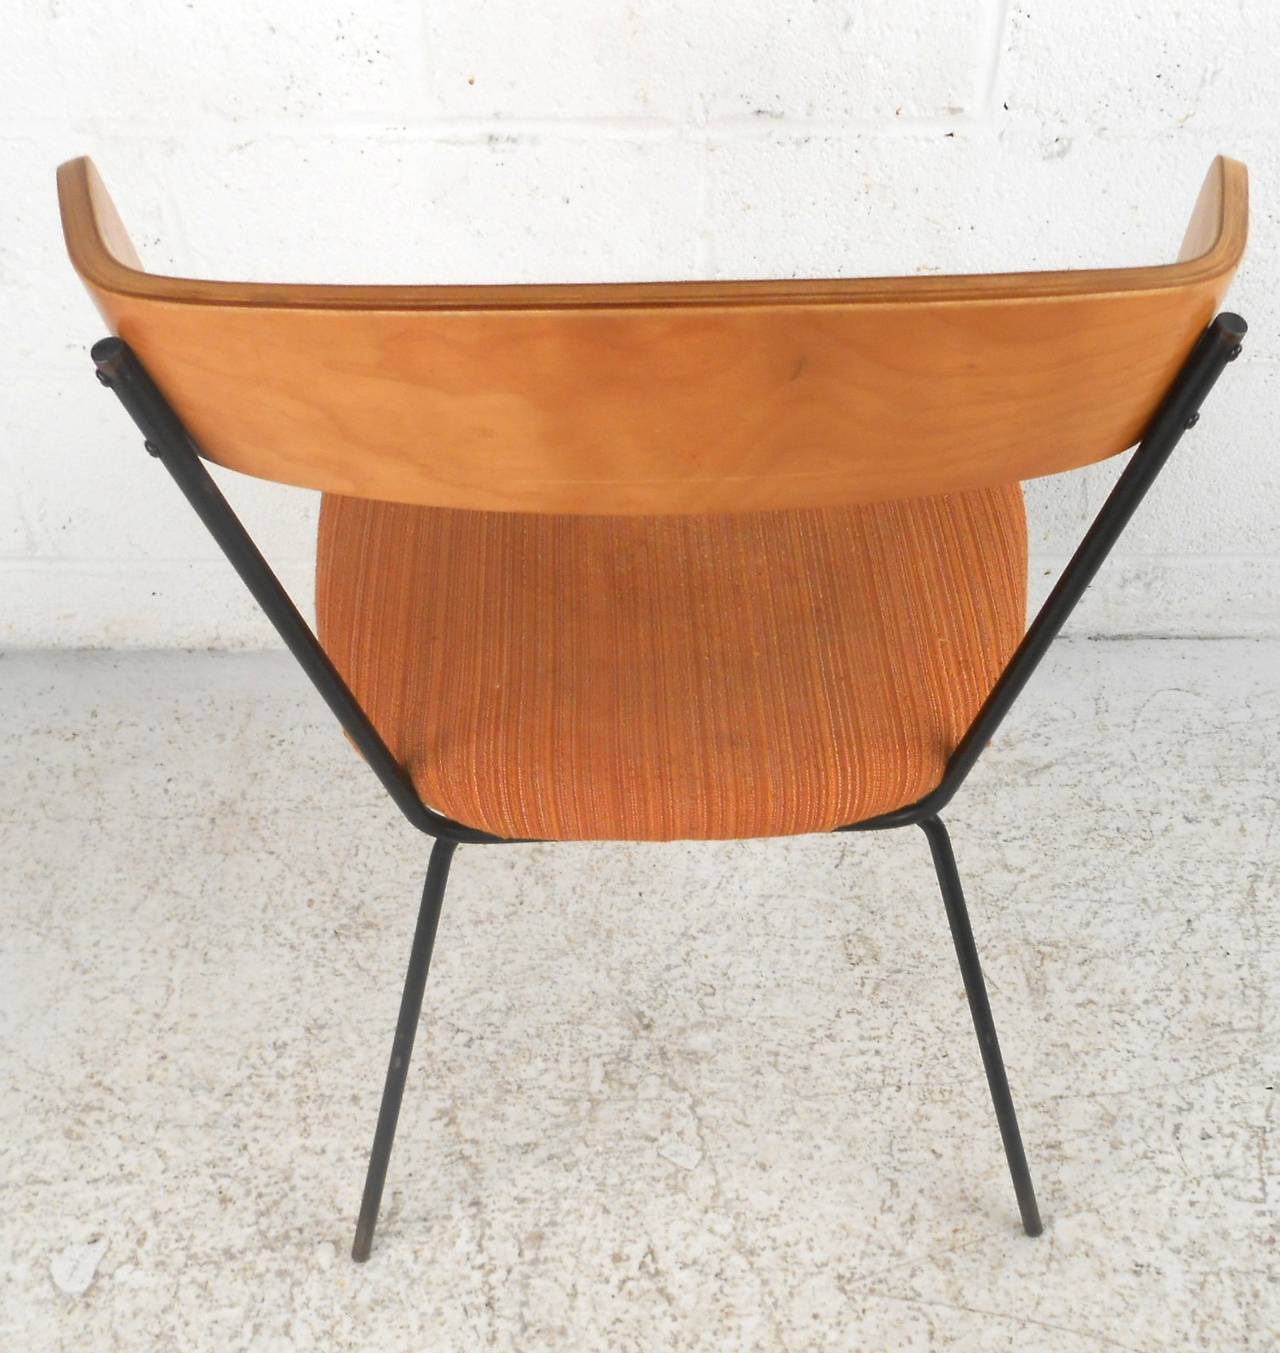 American Mid-Century Modern Paul McCobb 1535 Style Bentwood Dining Chair